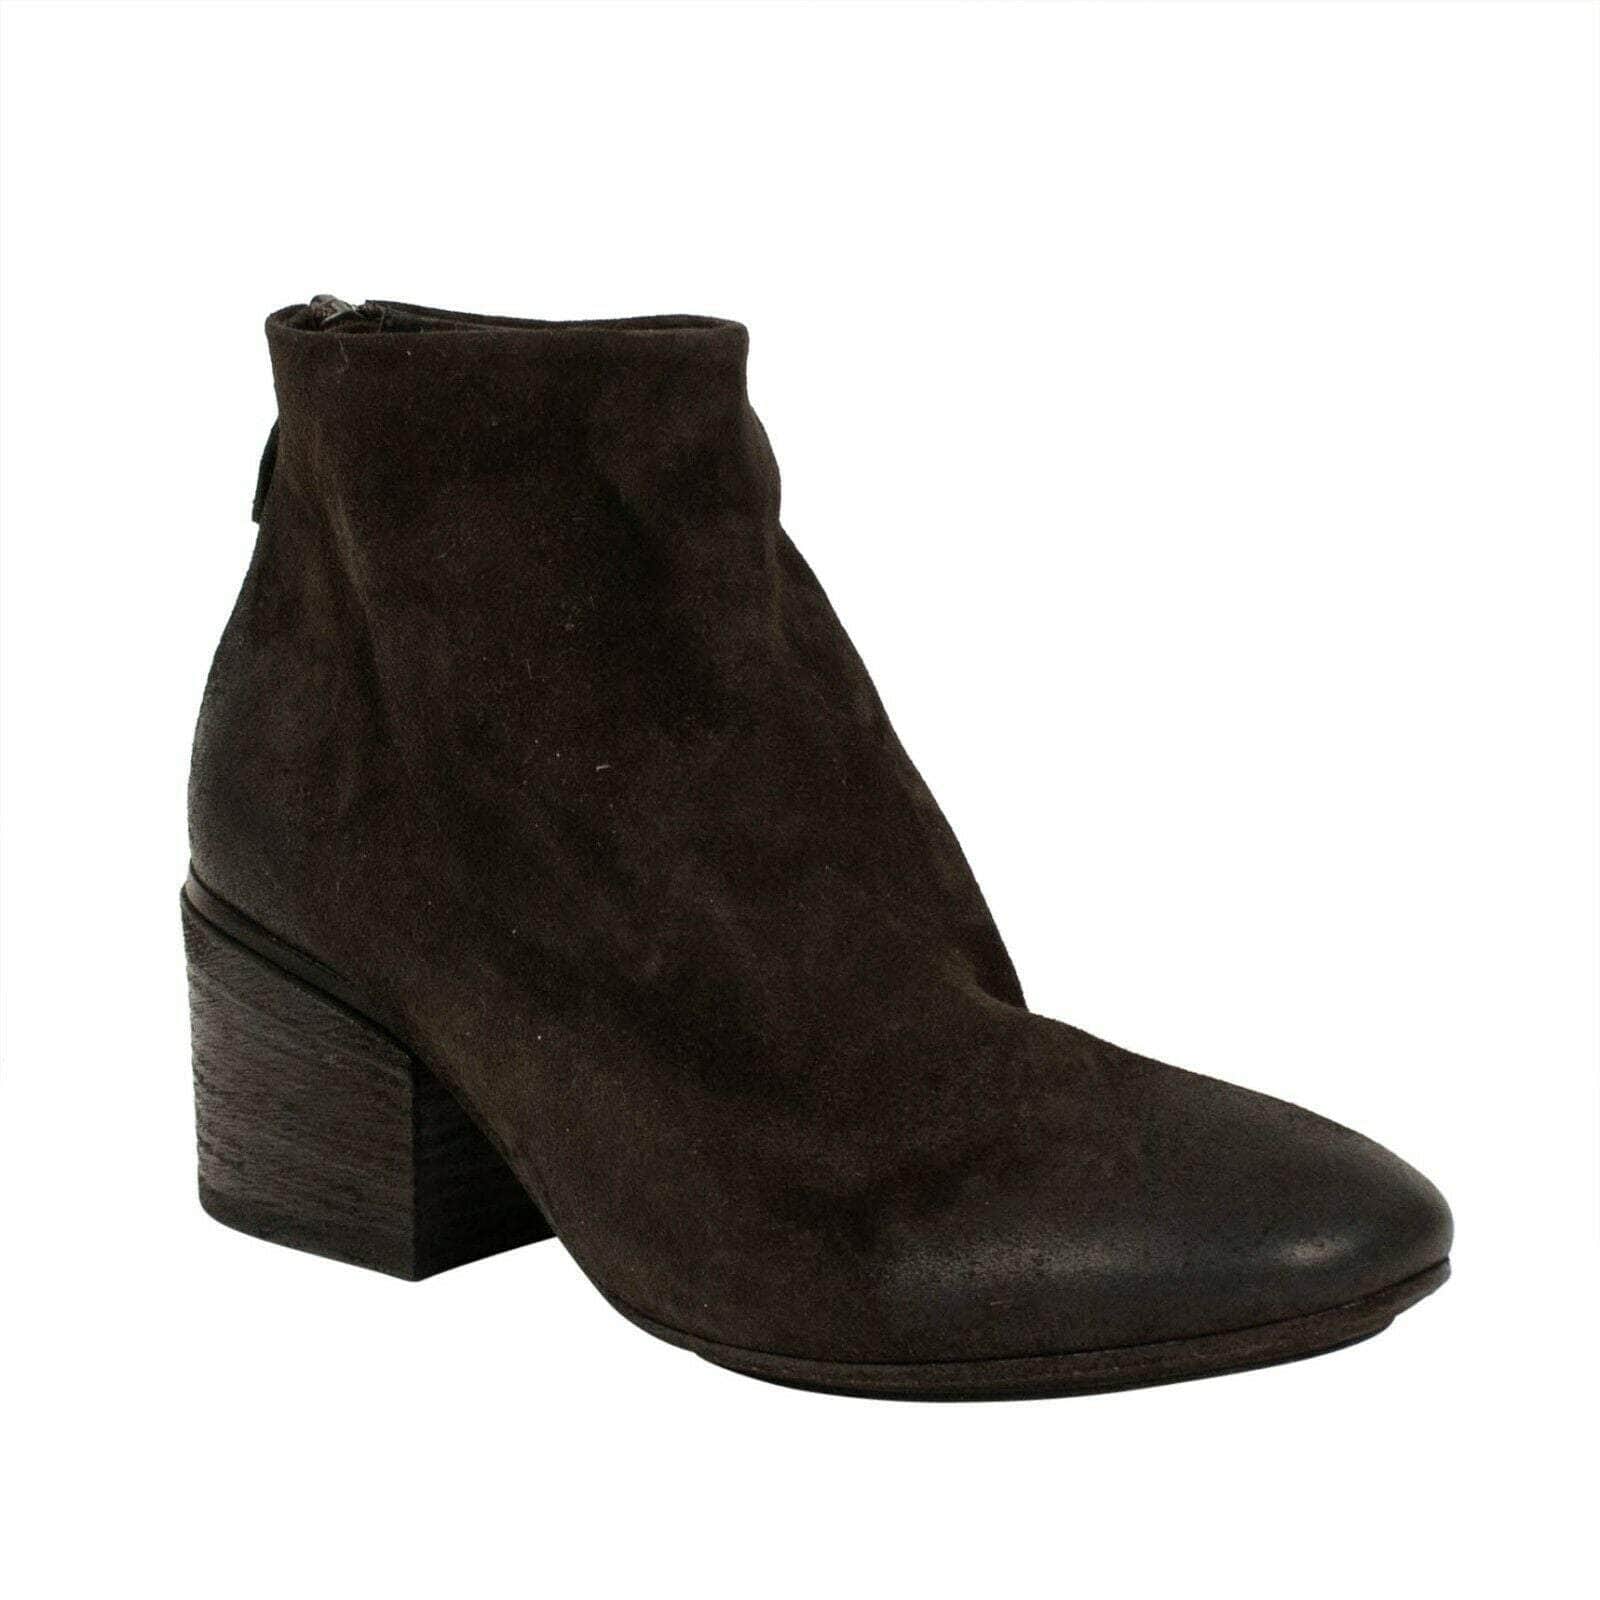 Marsell Boots 12 Funghetto Distressed Leather Ankle Boots - Brown 69LE-2105/NE 69LE-2105/NE